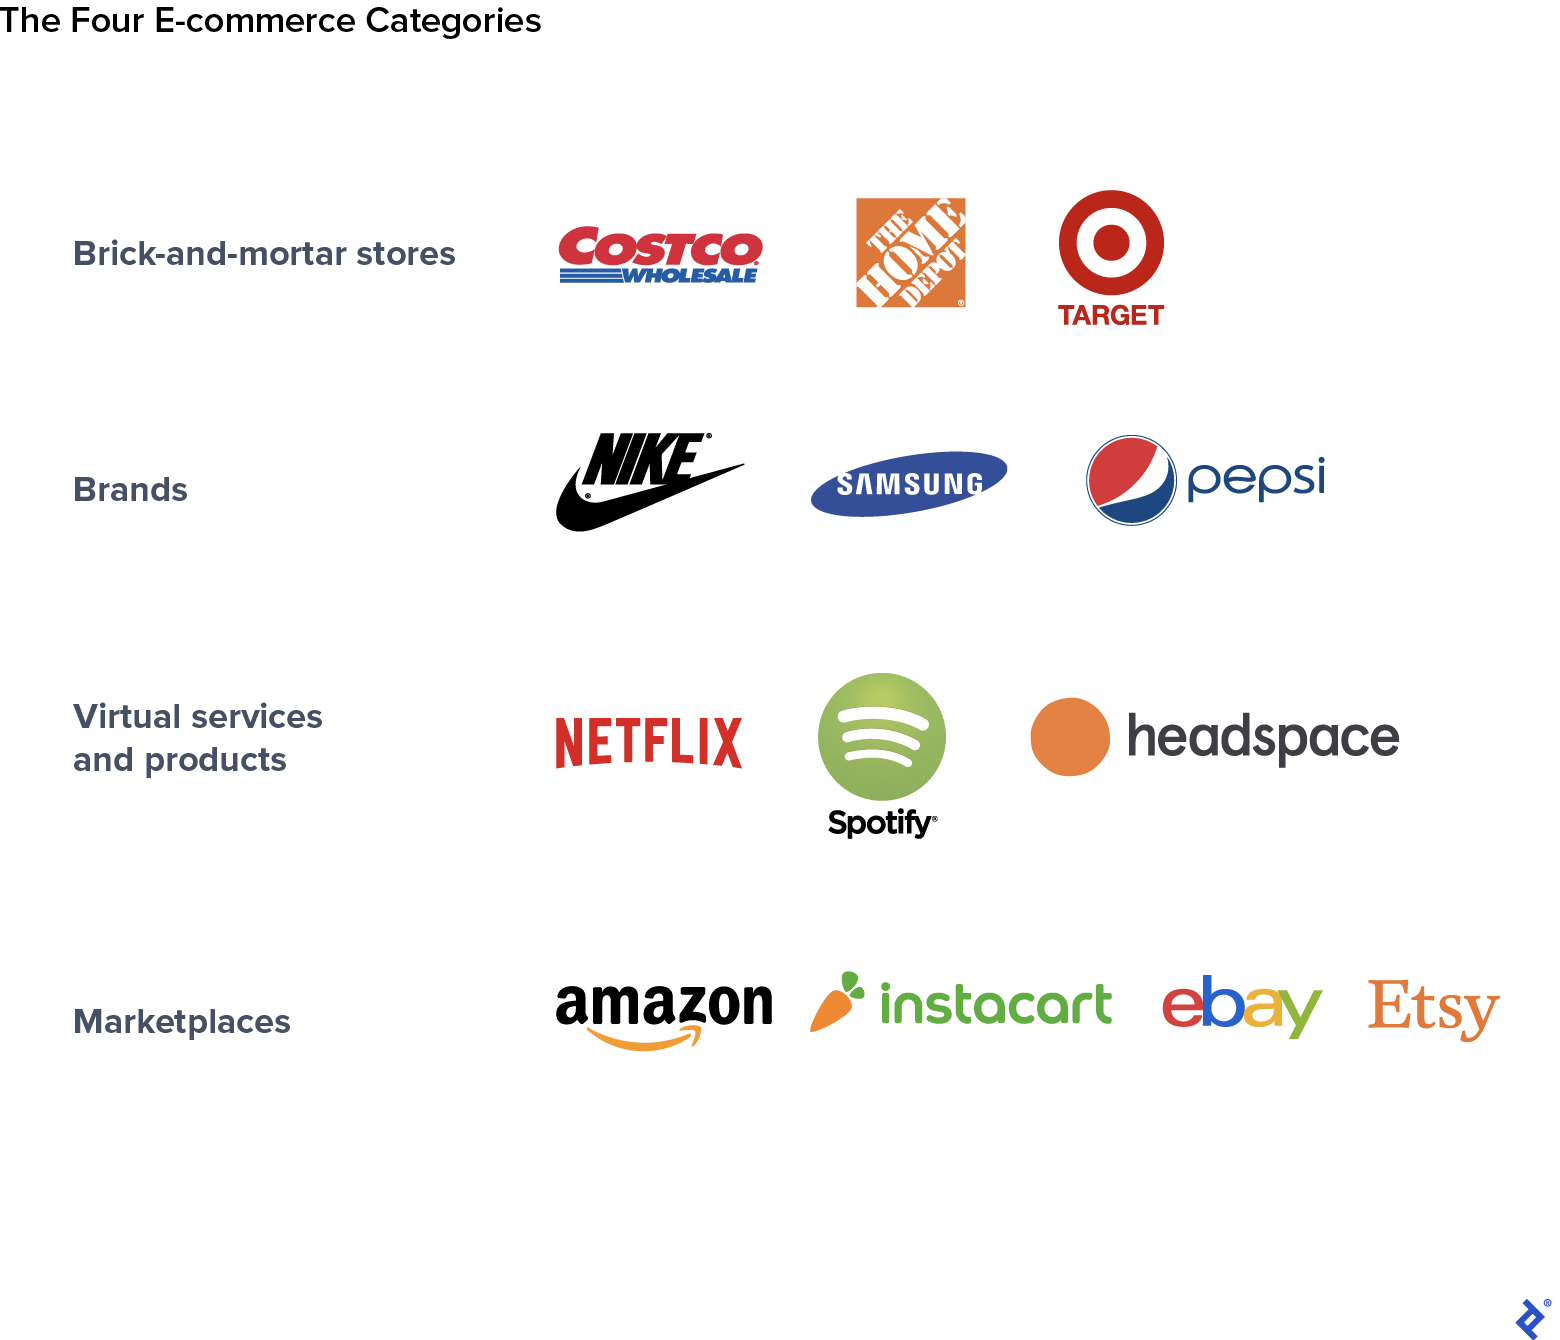 A graphic with company logos depicting the four categories of e-commerce companies. Brick-and-mortar stores: Costco, The Home Depot, Target. Brands: Nike, Samsung, Pepsi. Virtual services and products: Netflix, Spotify, Headspace. Marketplaces: Amazon, Instacart, eBay, Etsy.